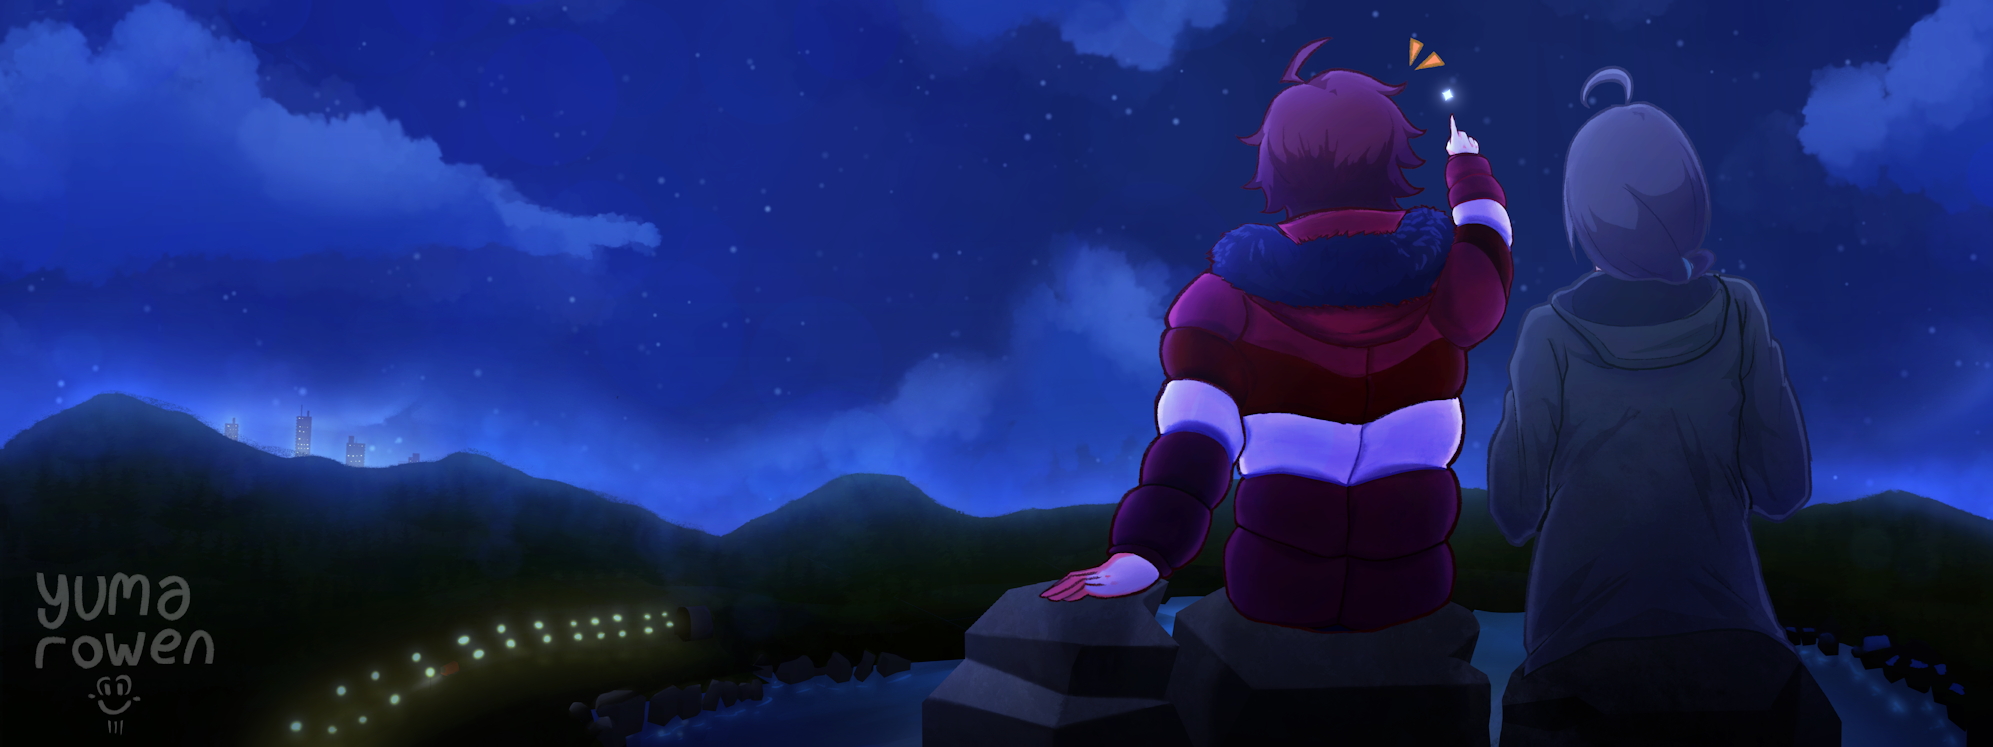 Commission for Burbur! Discord Banner representing Teru and Producing hanging out at night! One star in particular is very bright! Is it The First Star? DO NOT REUSE.